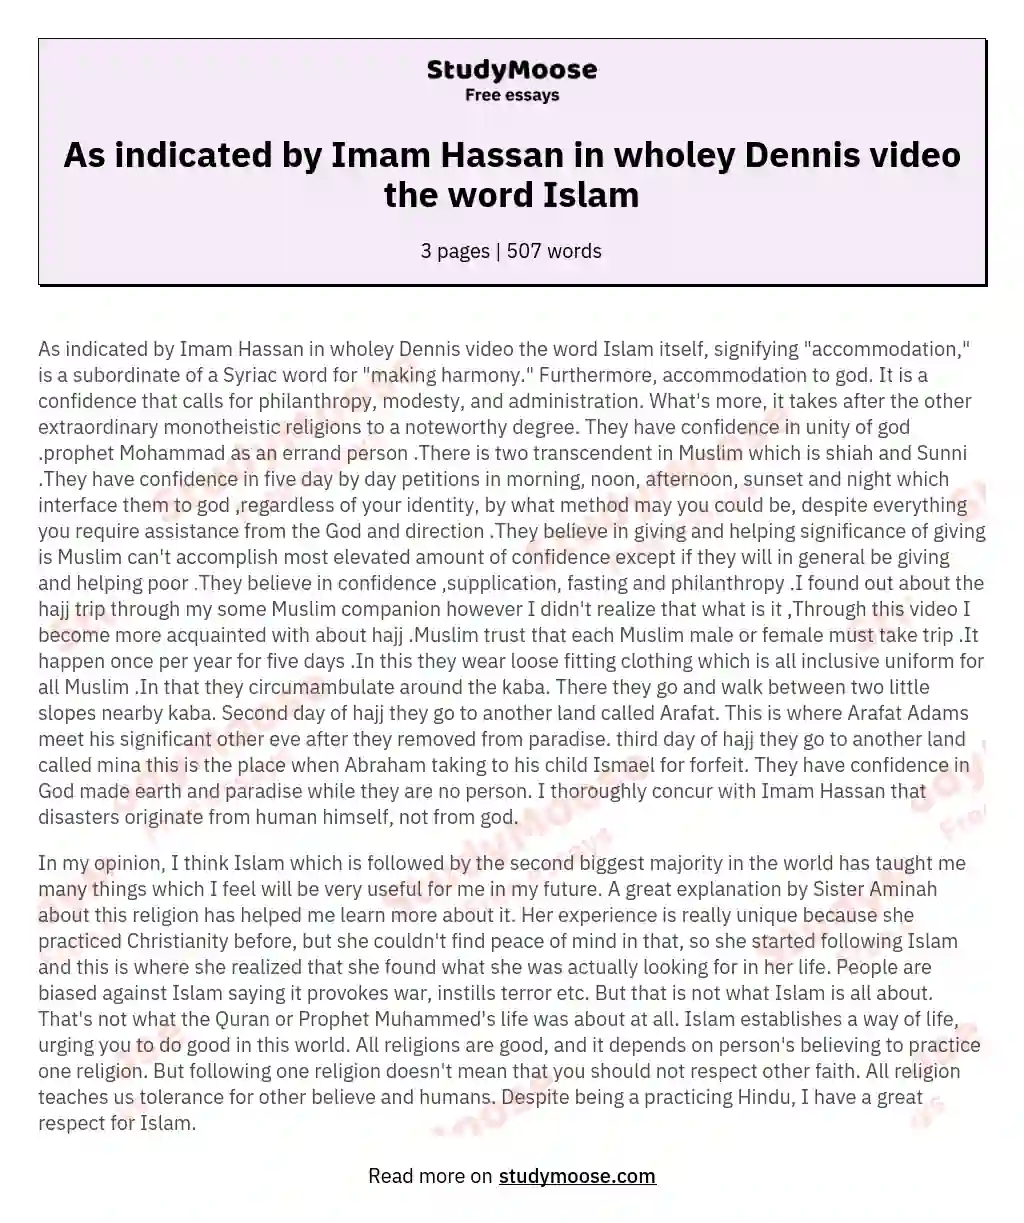 As indicated by Imam Hassan in wholey Dennis video the word Islam